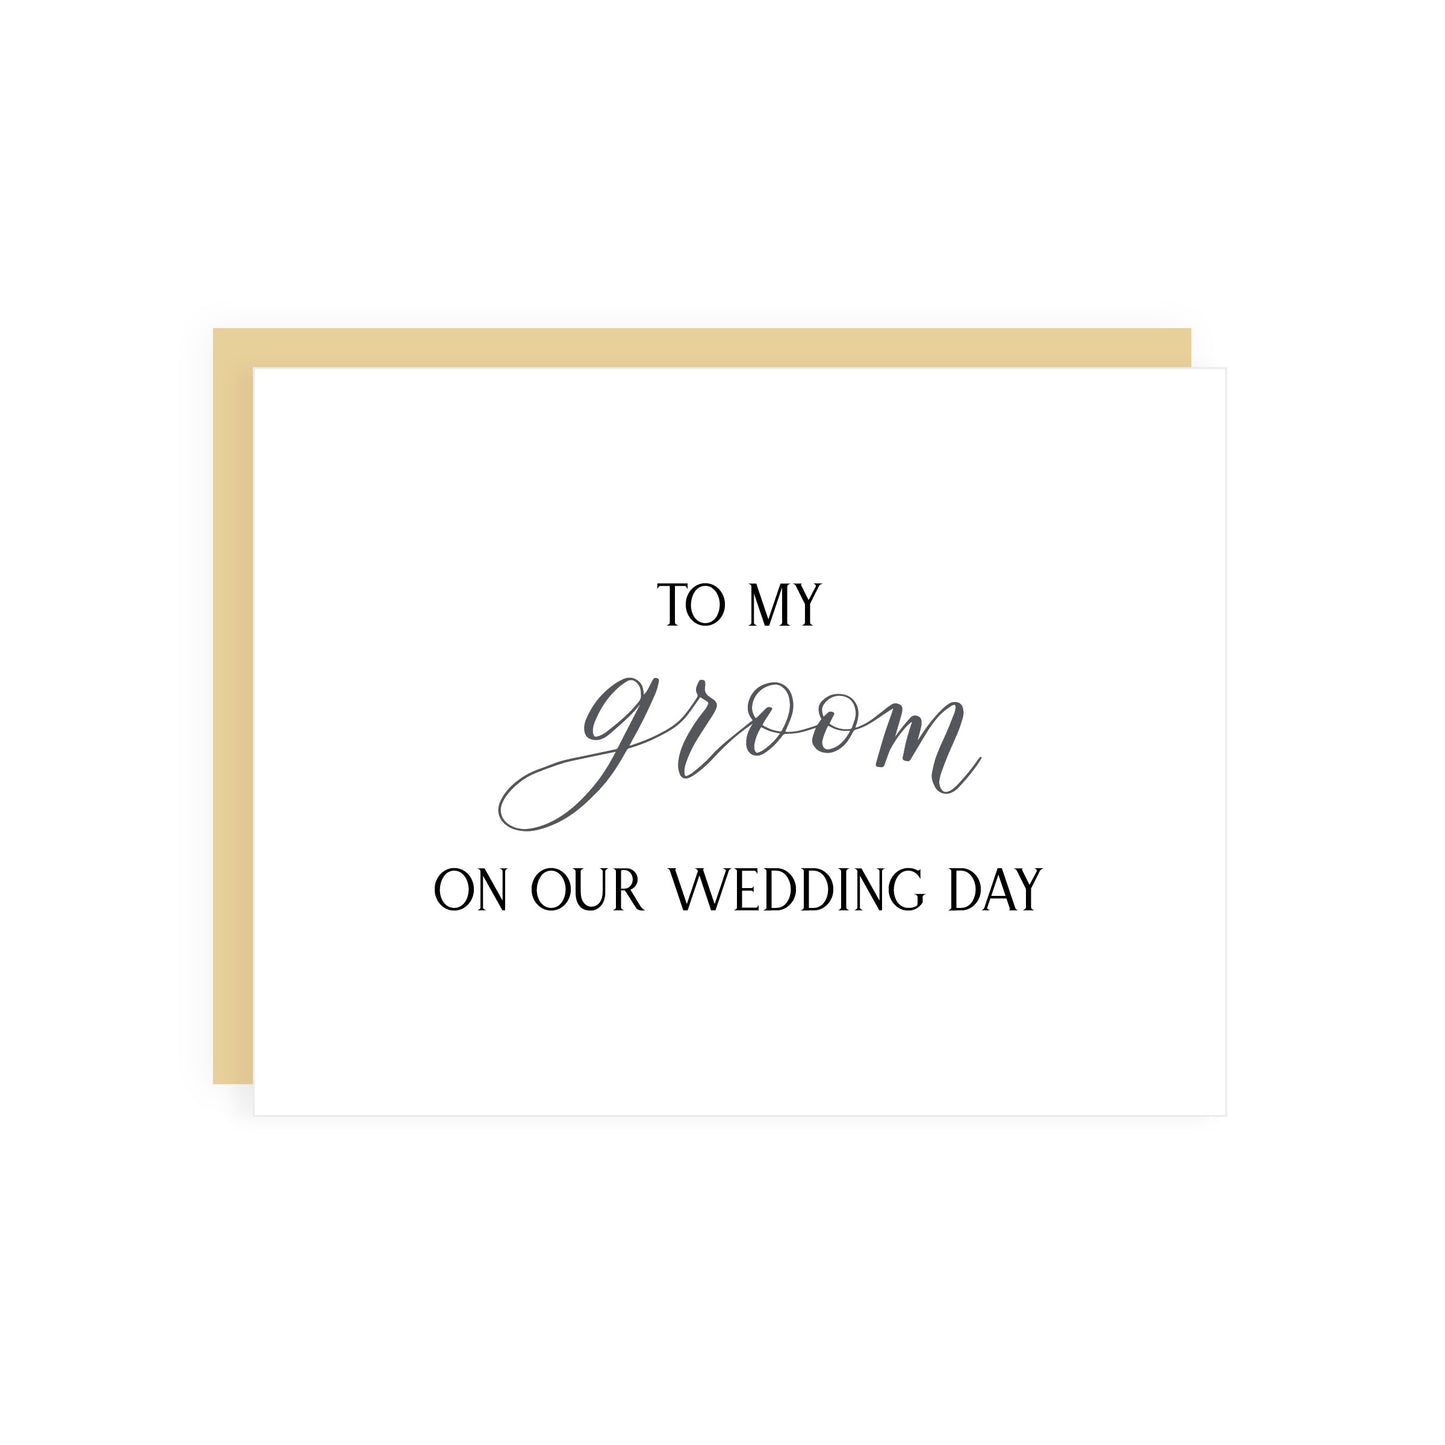 To My…On My Wedding Day Card